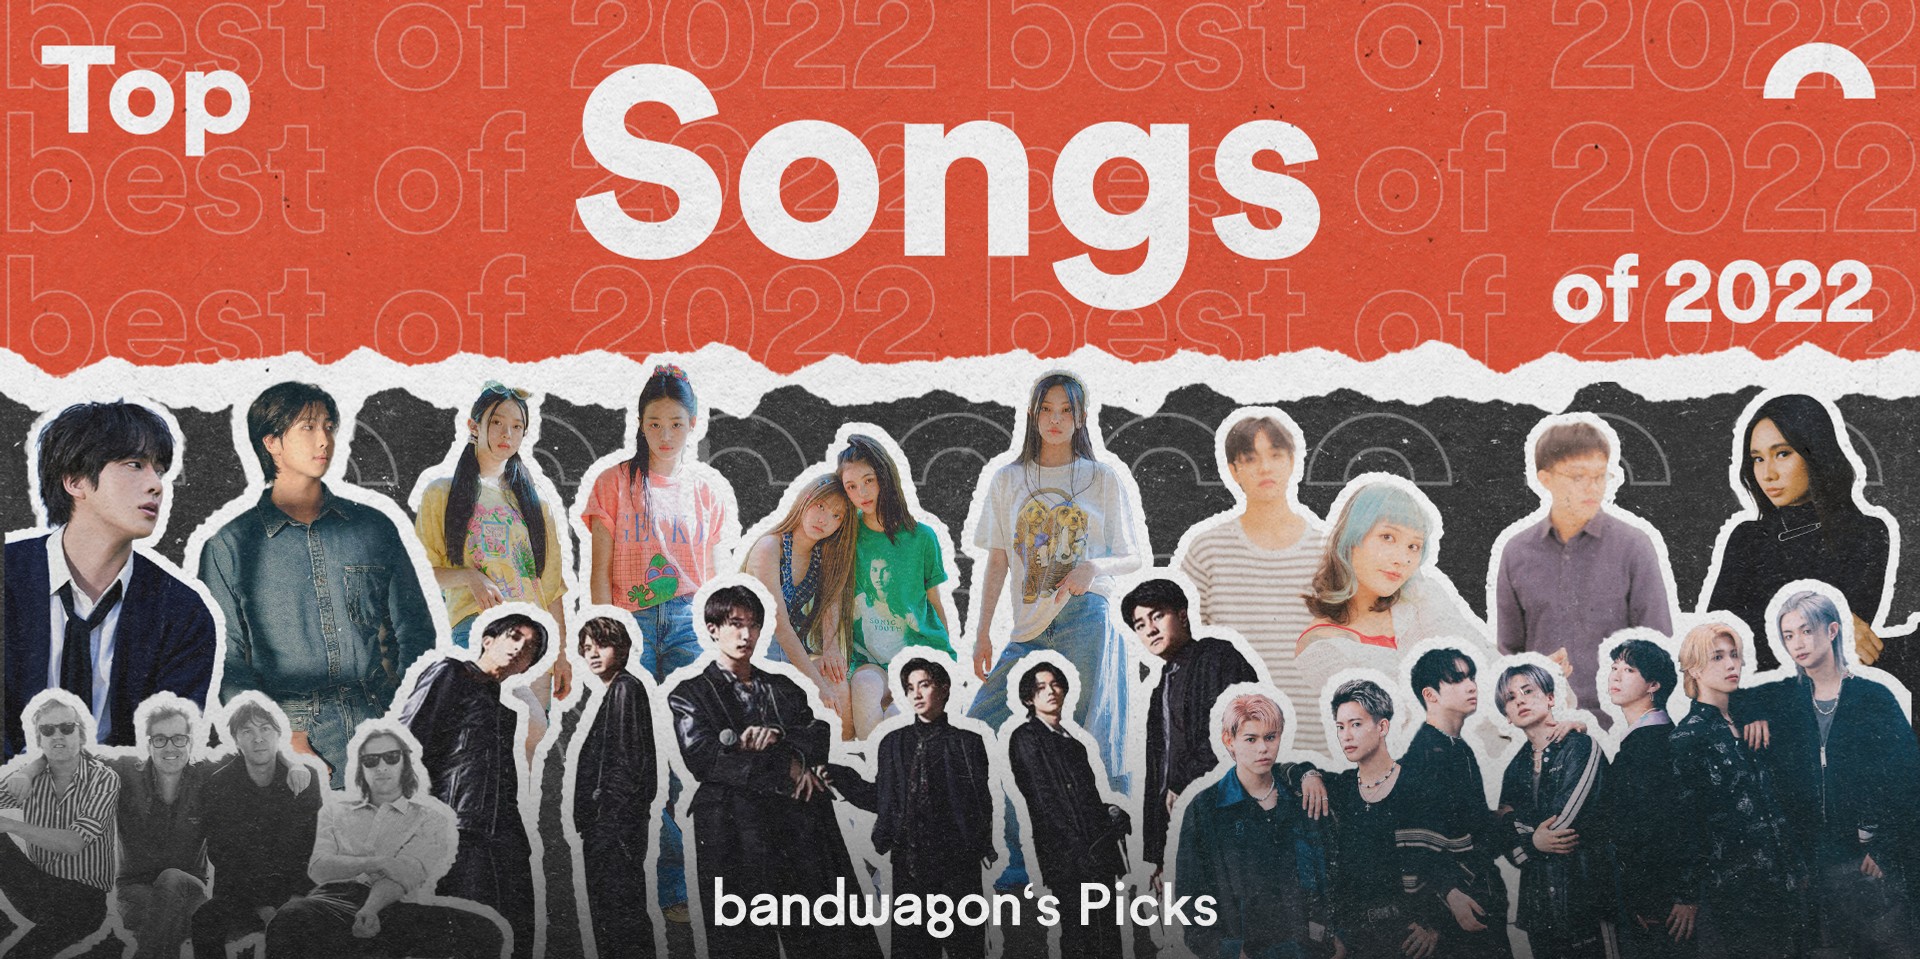 Top Songs of 2022: Bandwagon's Picks – NewJeans, NIKI, Jin, BE:FIRST, RM, SixTONES, Sobs, Phoenix, and more